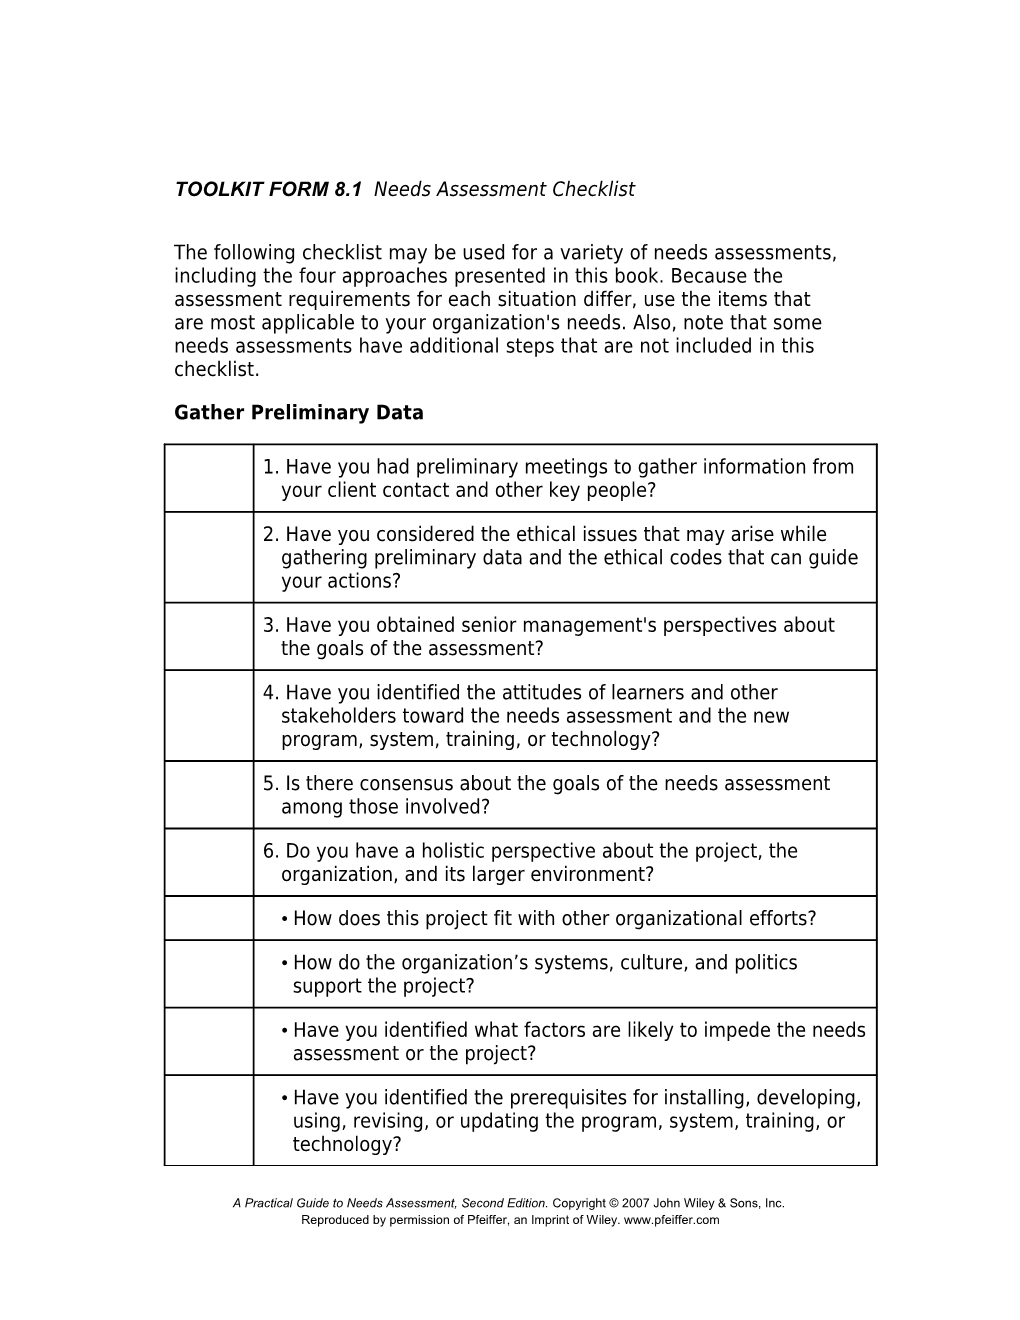 TOOLKIT FORM 8.1 Needs Assessment Checklist